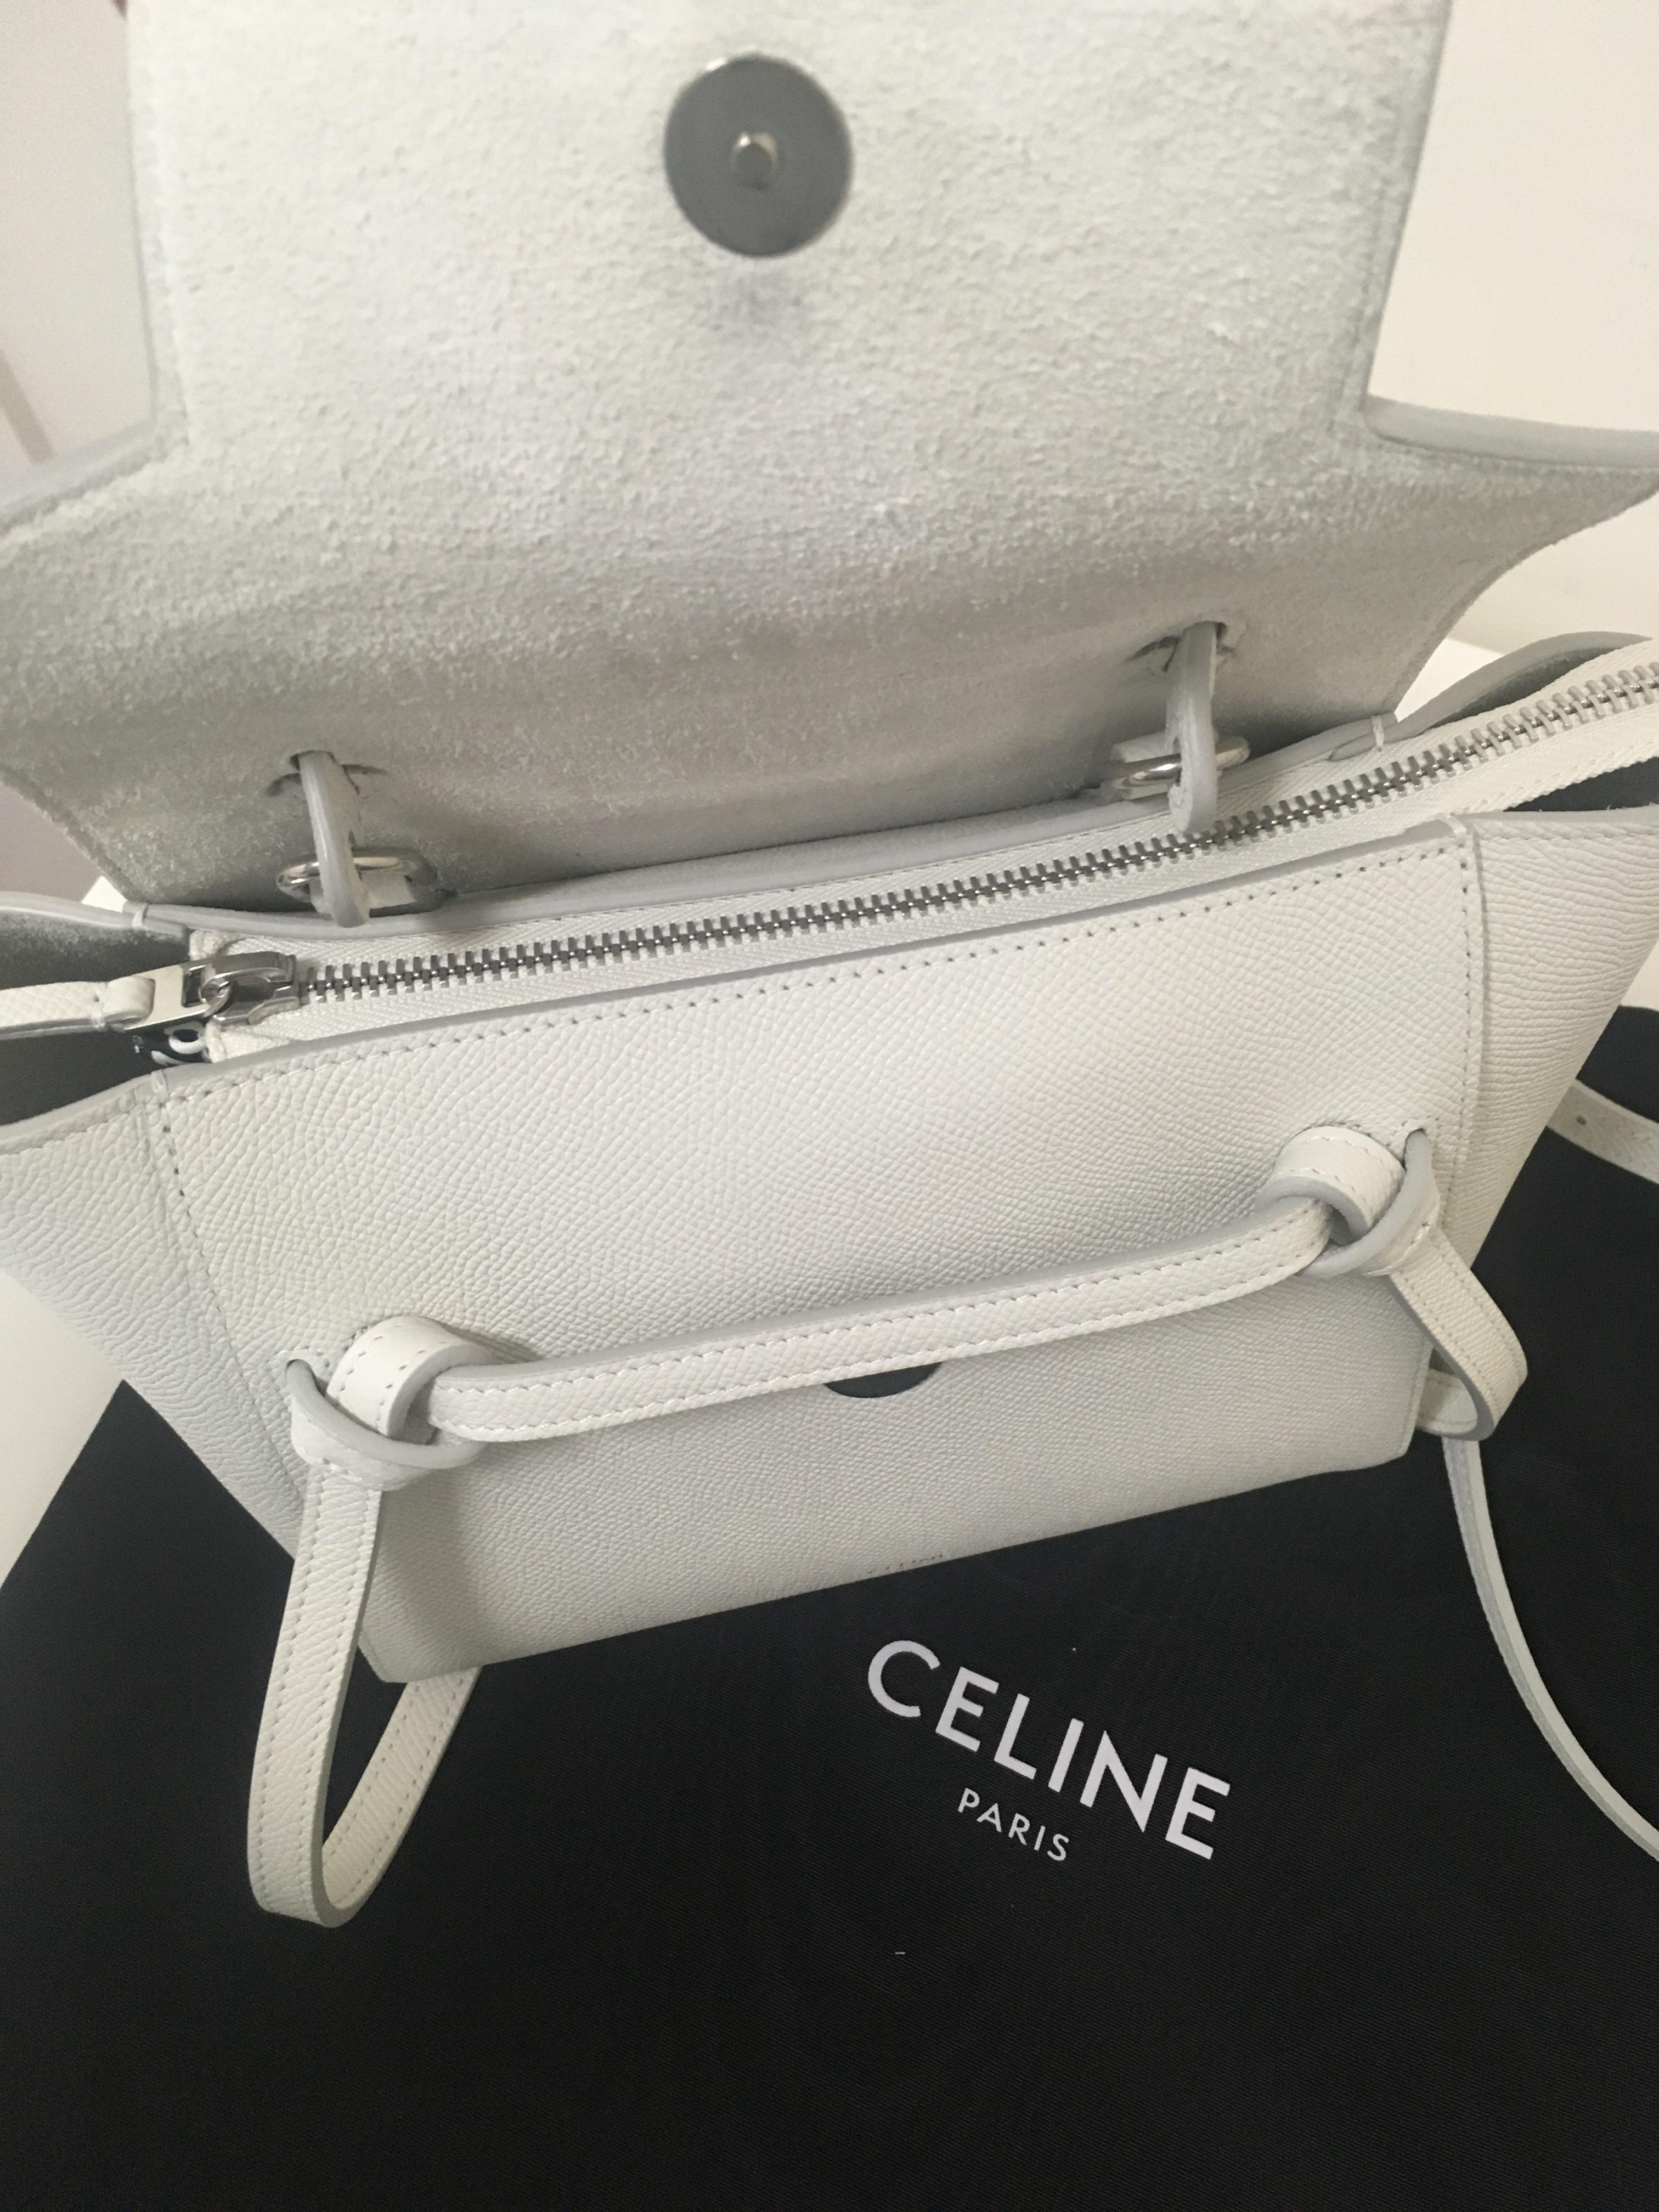 Review of Celine Belt Bag Nano? Is it outdated? Can you dress up